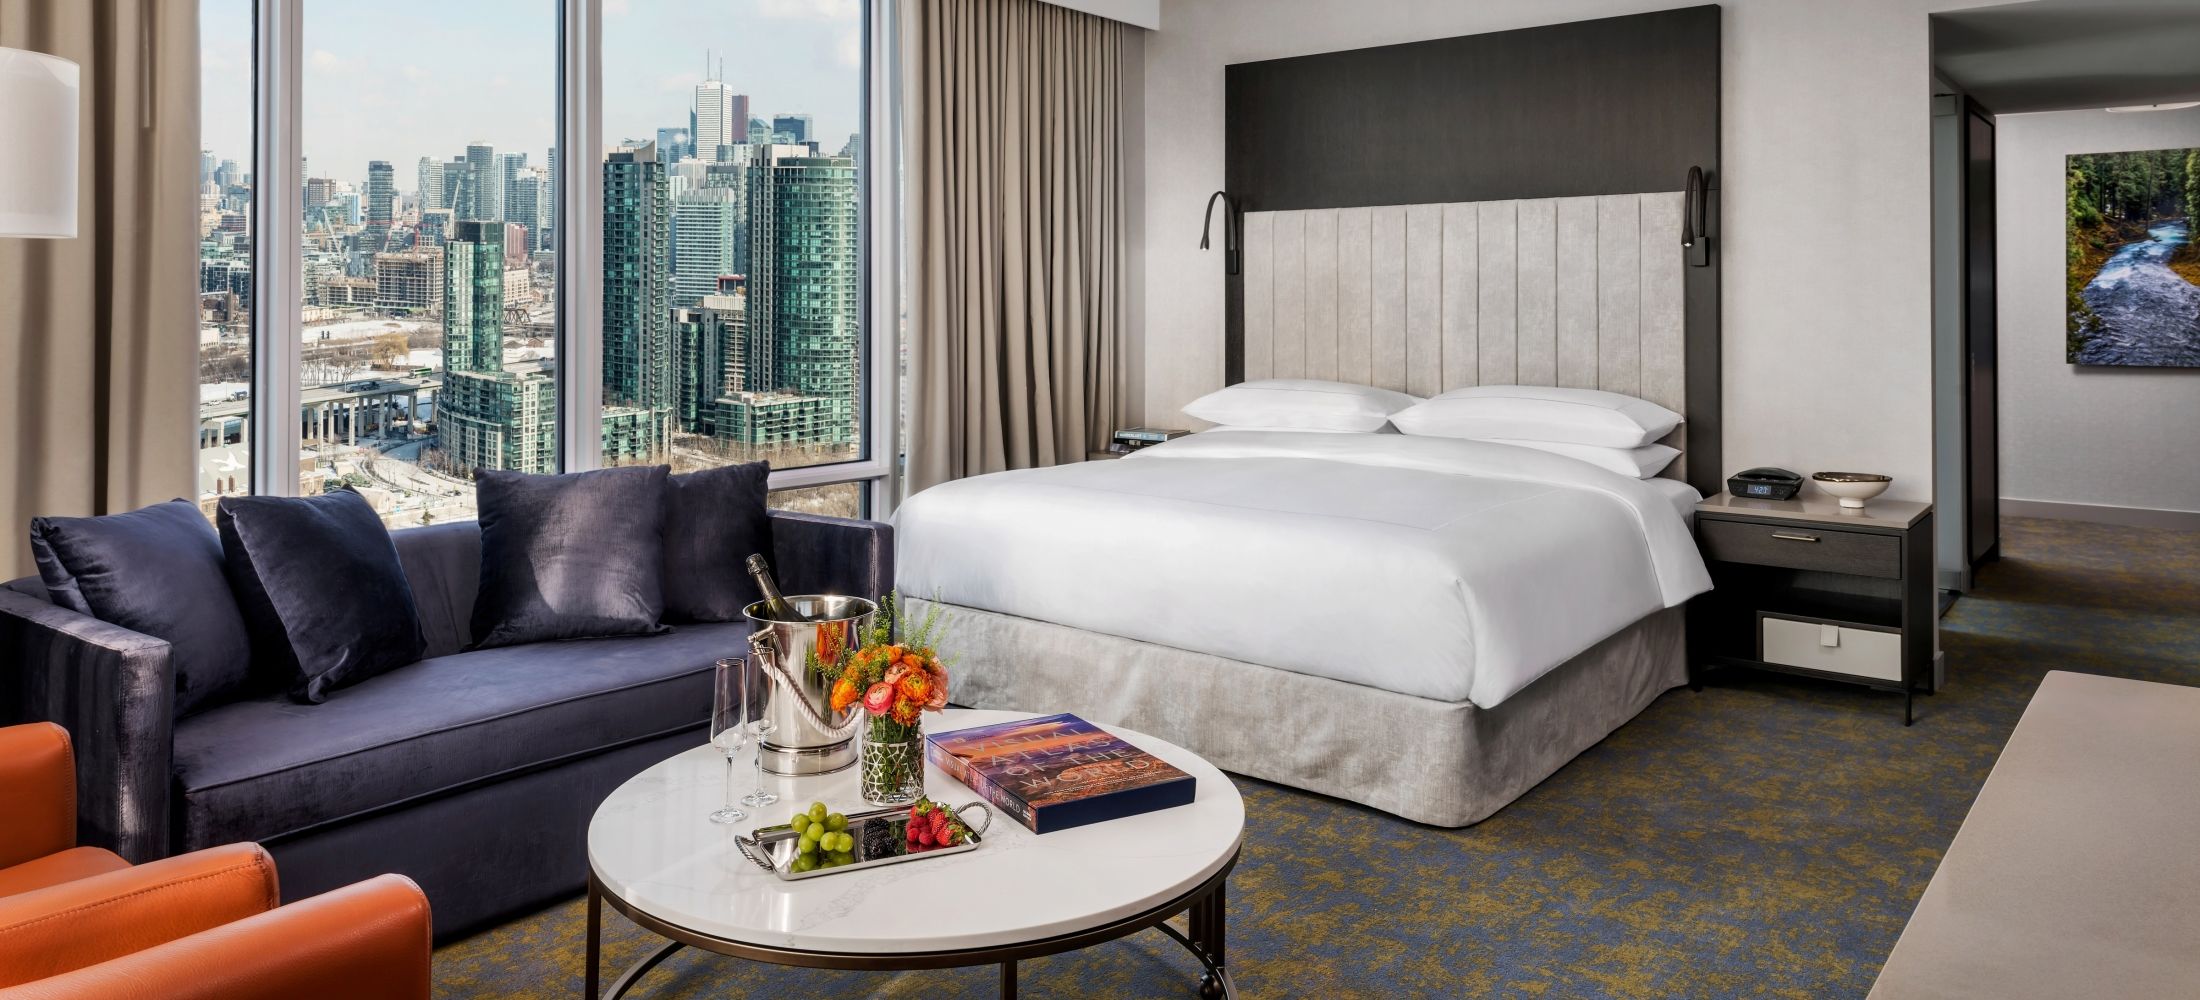 Hotel X Toronto will add 400 rooms, two ballrooms, two swimming pools, 4 tennis courts, ample meeting space, 4 restaurants, a spa and a 90,000 square foot sports club to all the other amenities available at downtown Toronto's Exhibition Place.